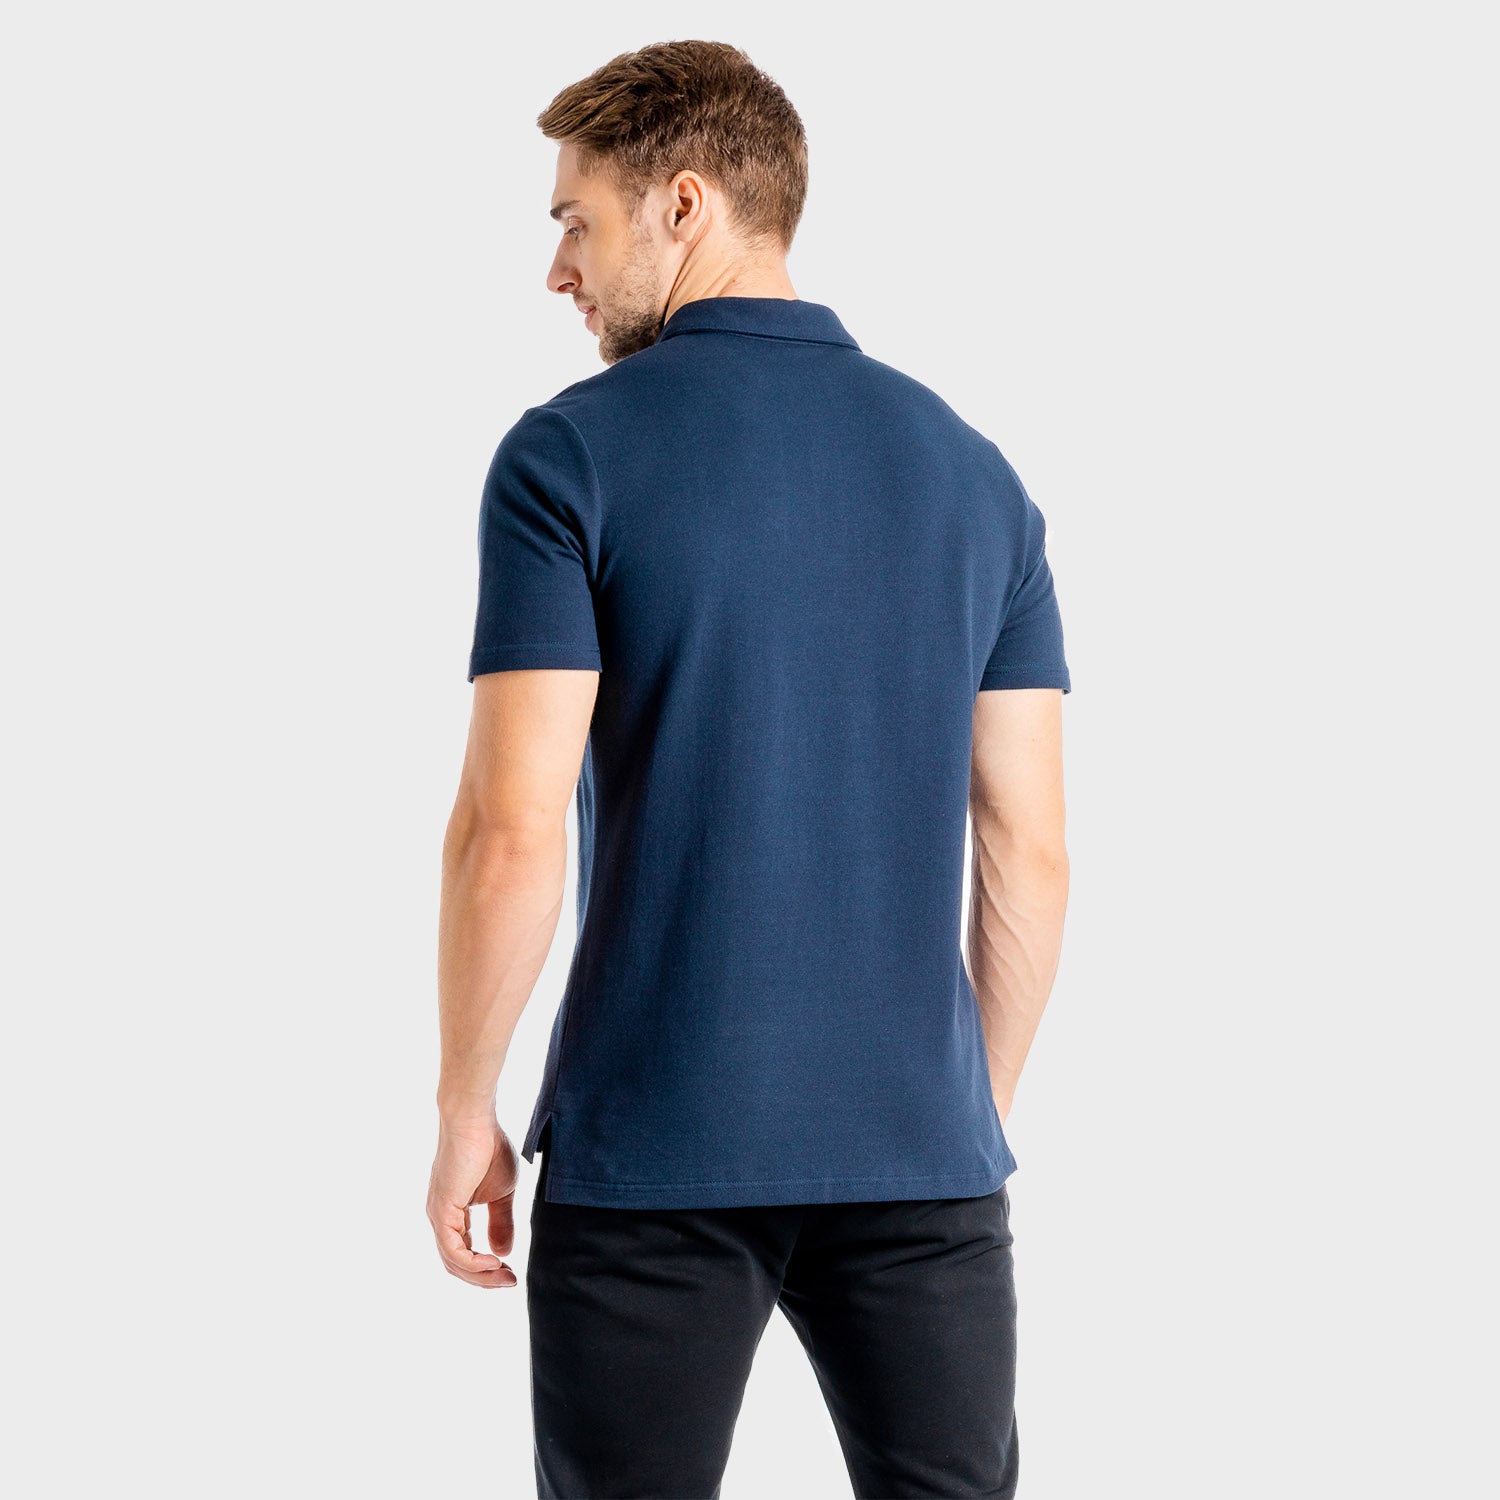 squatwolf-workout-shirts-for-men-core-polo-navy-gym-wear